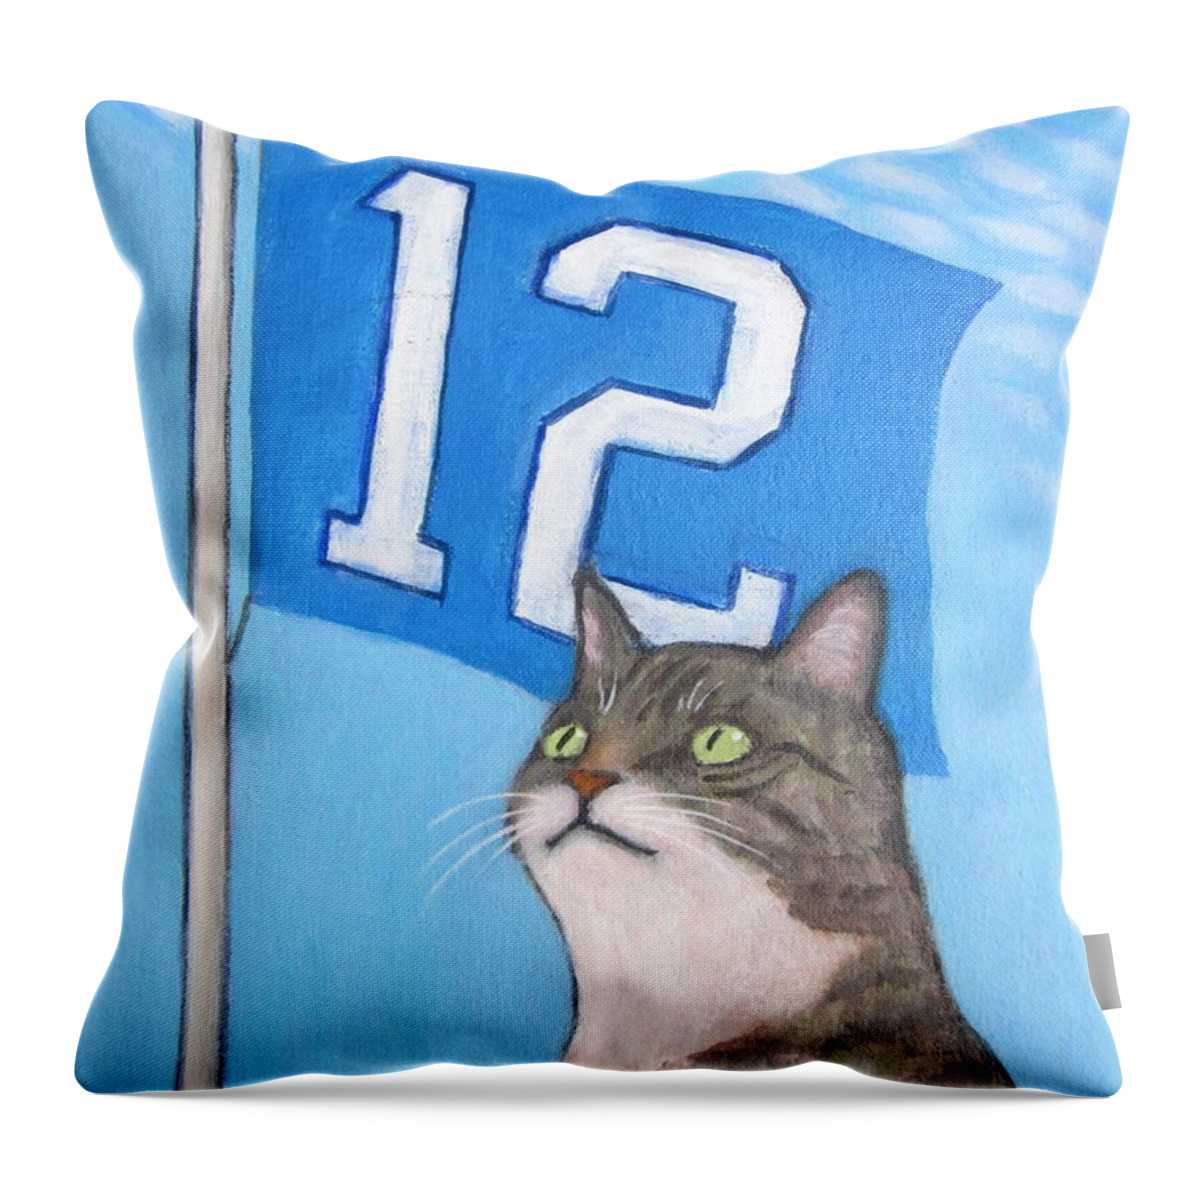 Seahawks Throw Pillow featuring the painting 12s Cat #1 by Kazumi Whitemoon